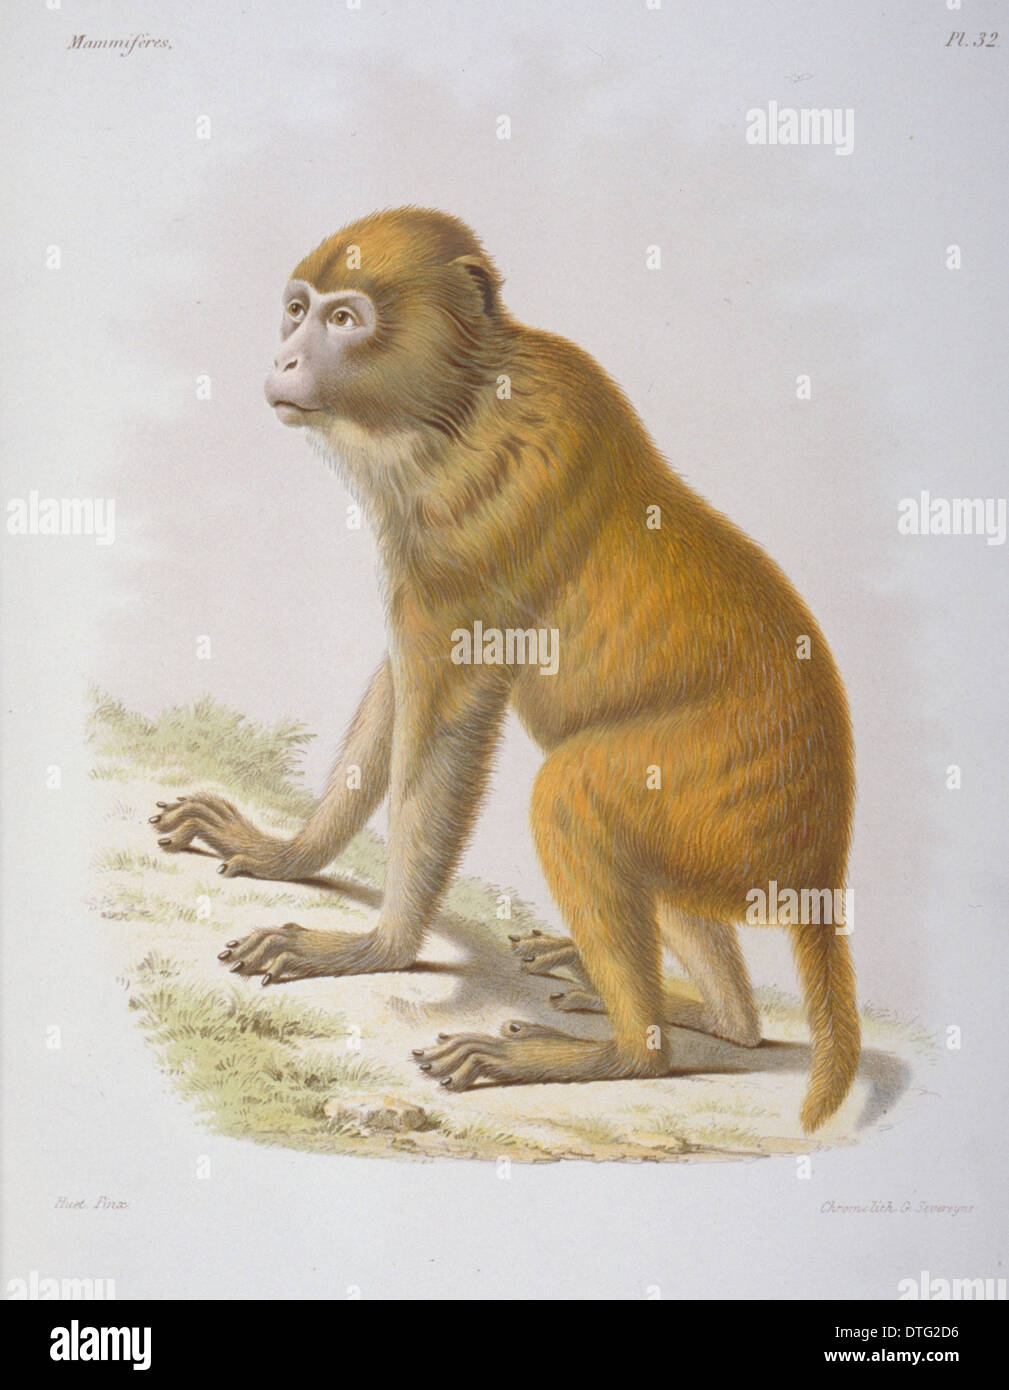 Macacus tcheliensis, macaquc Stock Photo